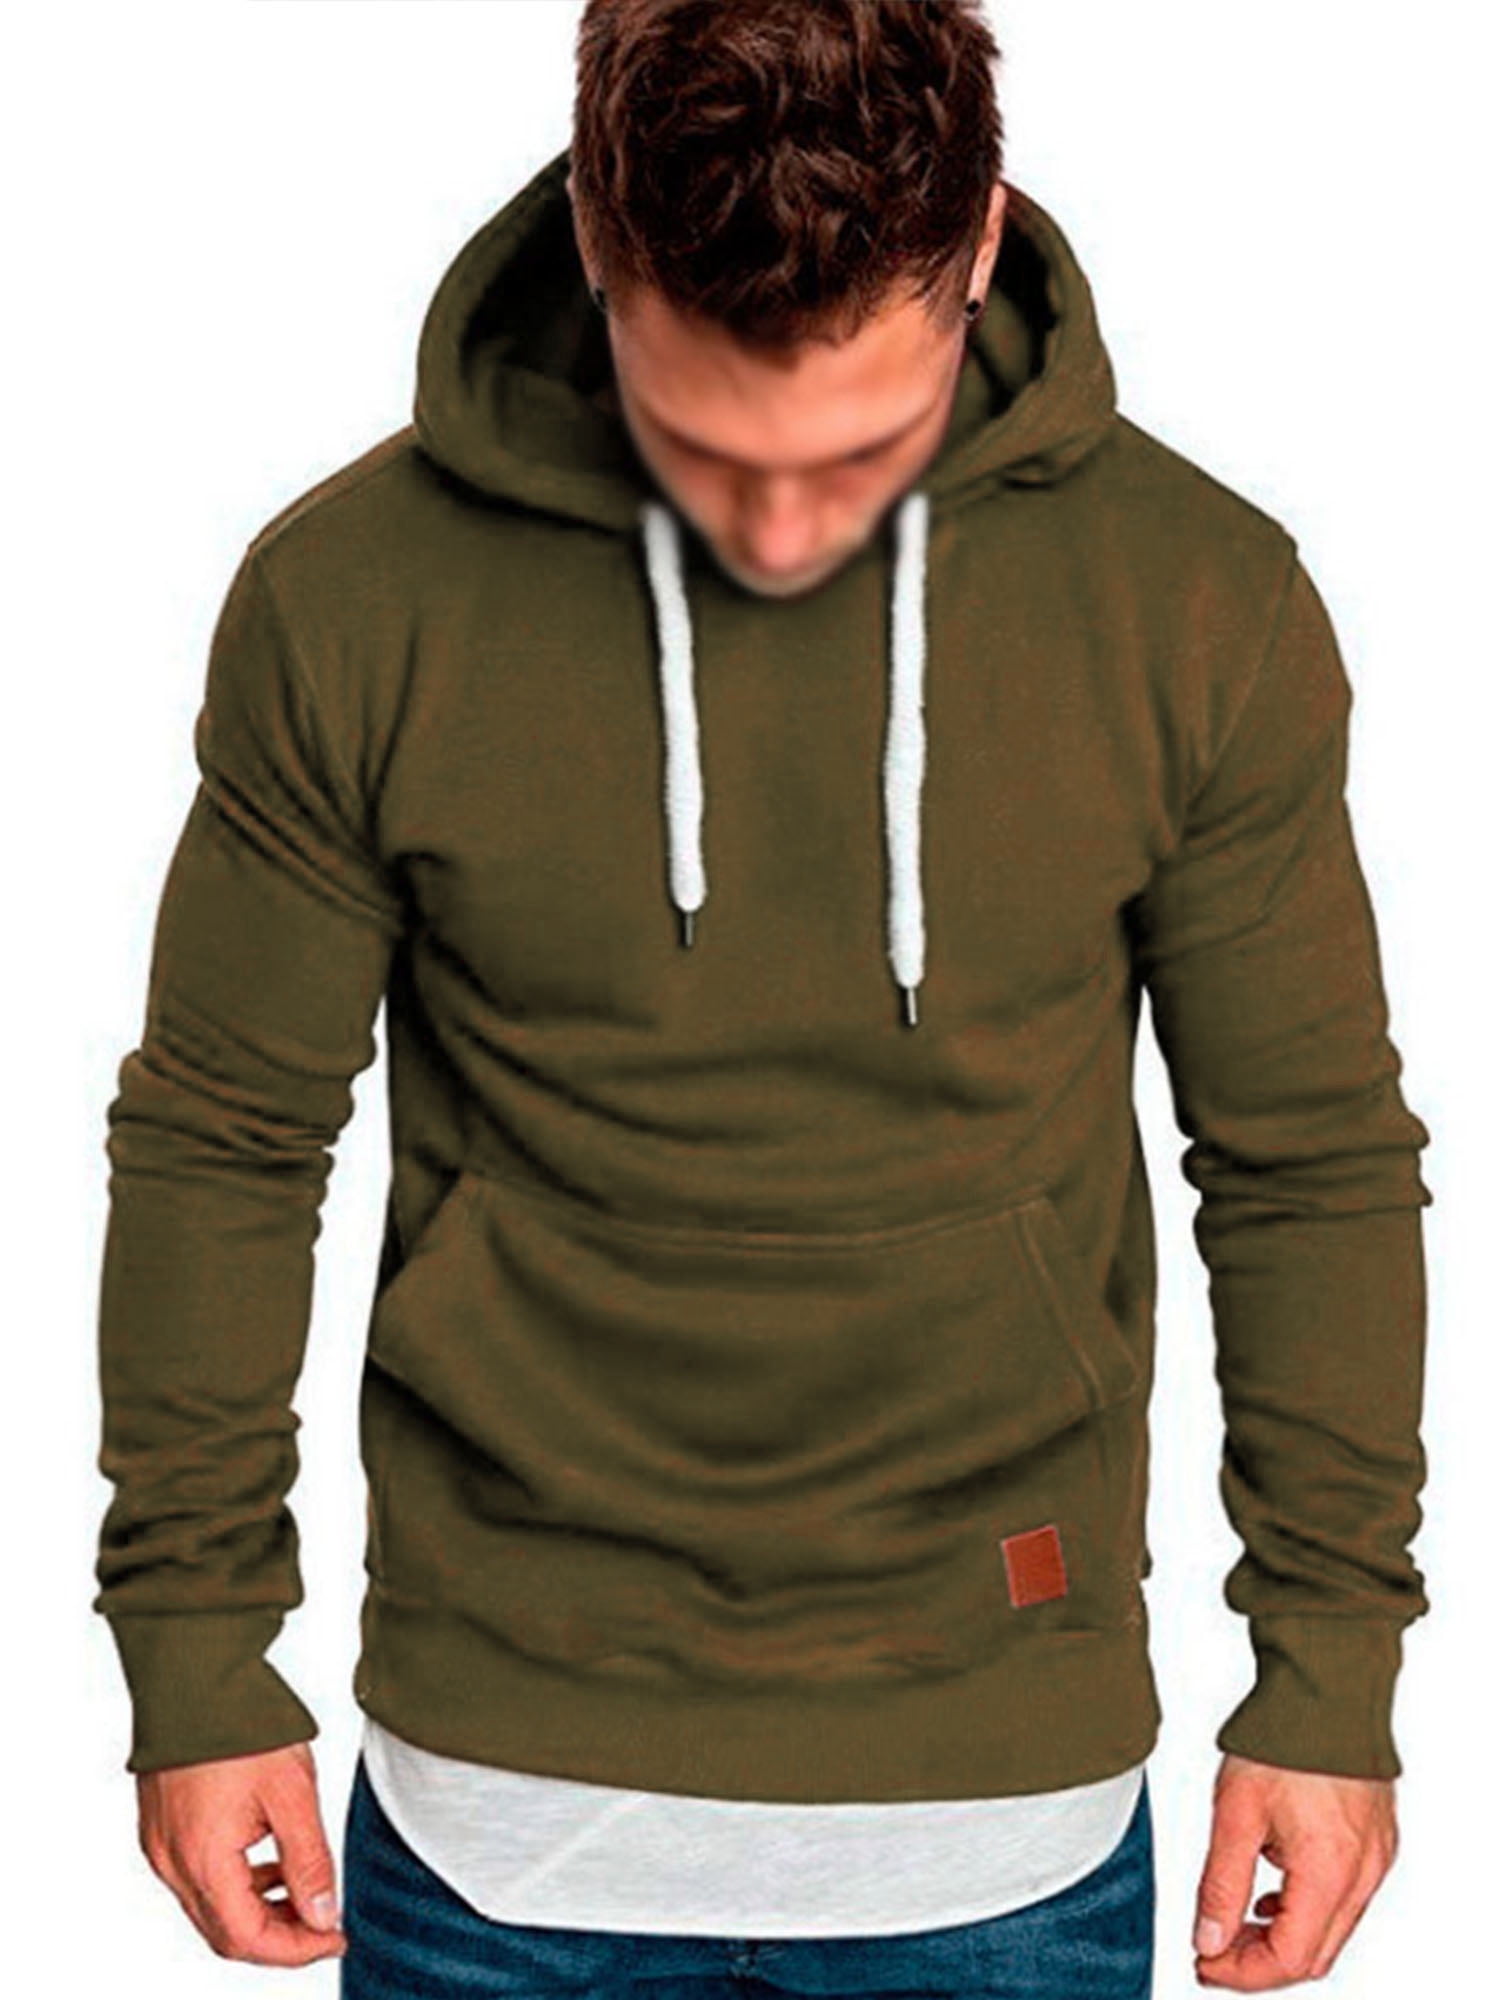 Details about   Men's Sports Clothing Hooded Long Sleeve Top And Pants Fitness Solid Outwear New